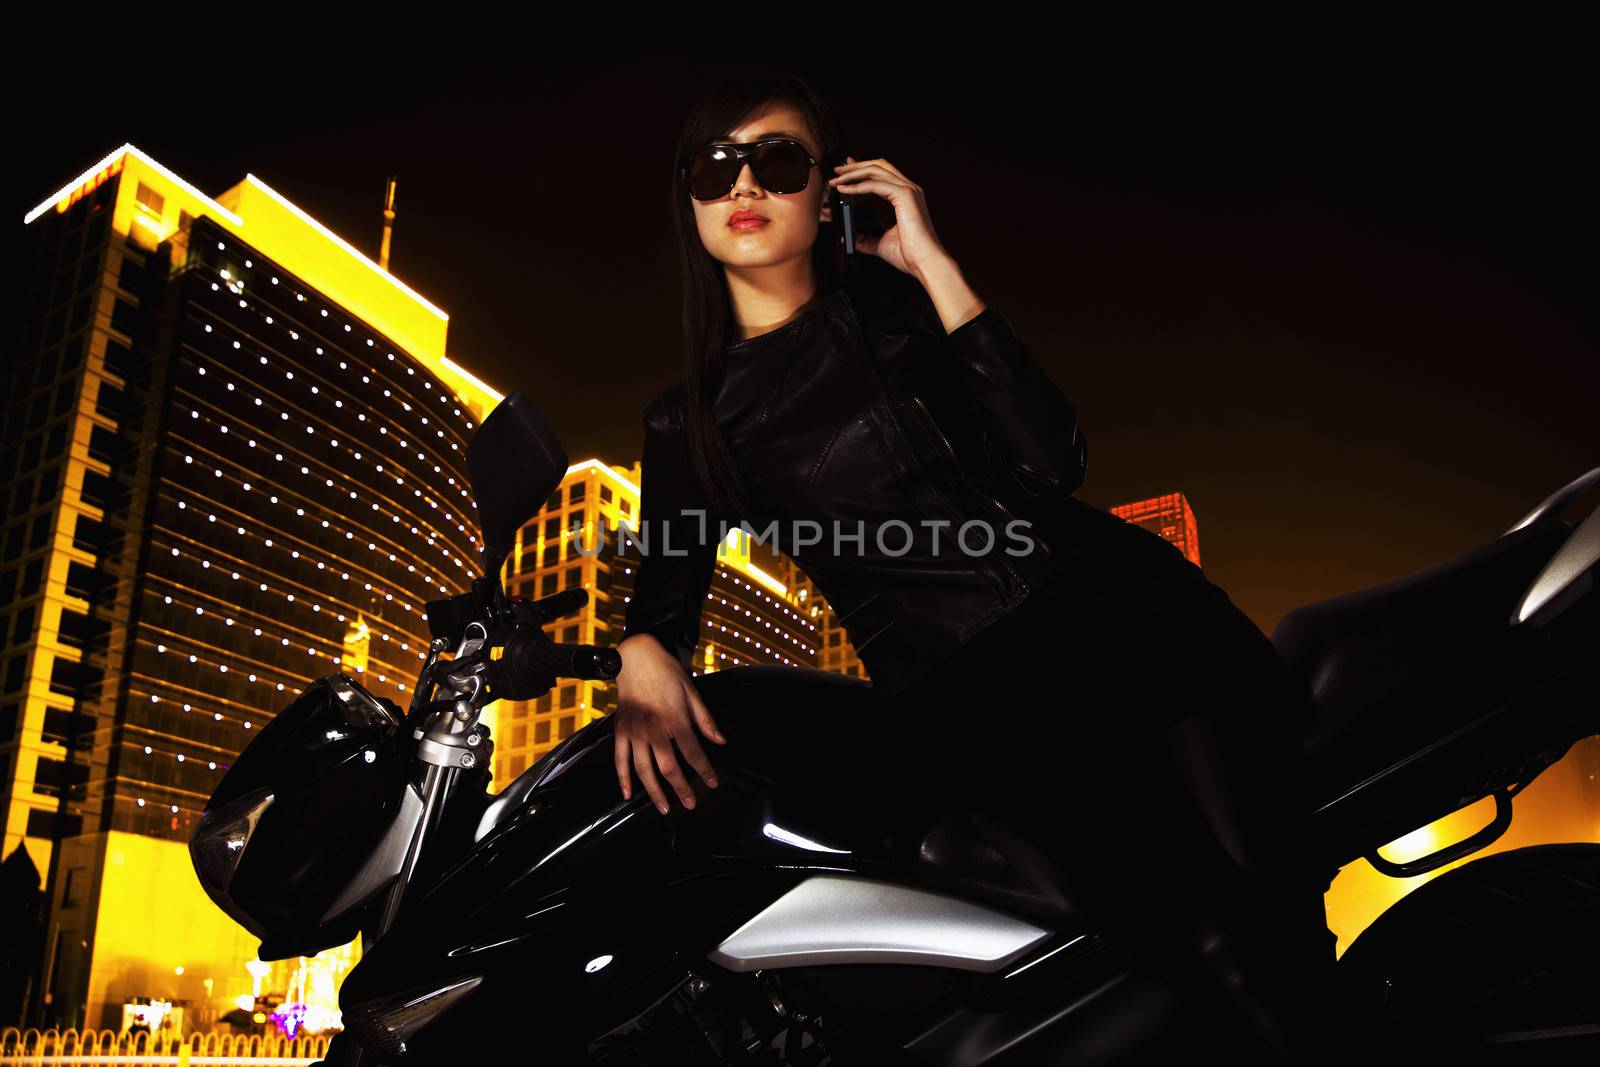 Beautiful young woman with sunglasses talking on the phone and leaning on her motorcycle at night